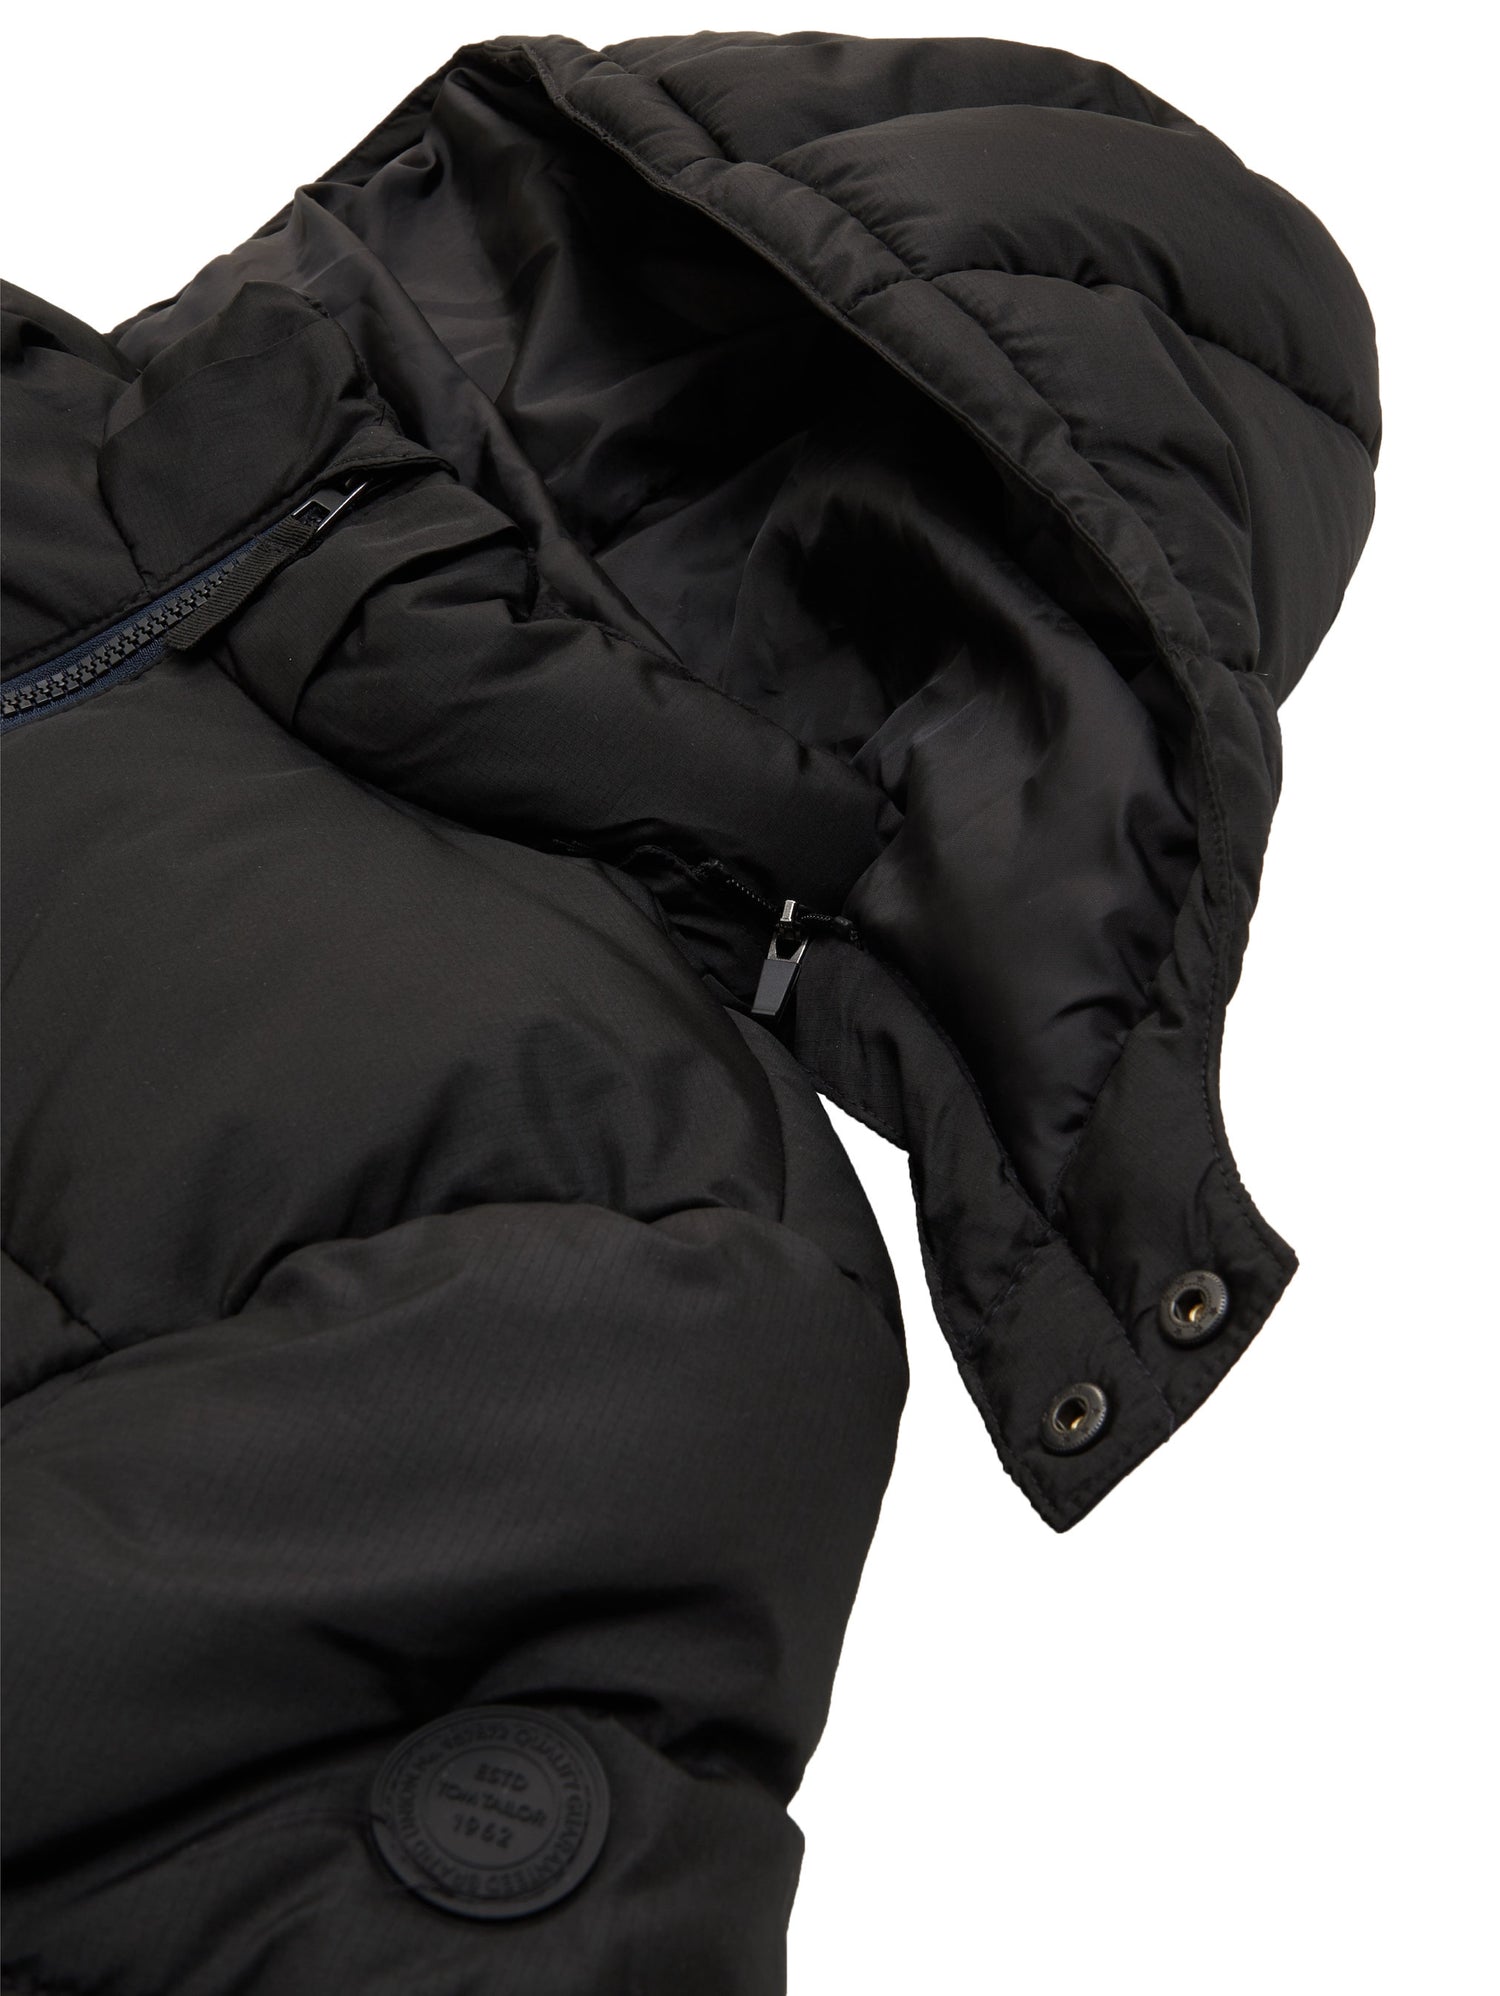 Heavy Puffer Jacket With Hood_1038540_29999_03